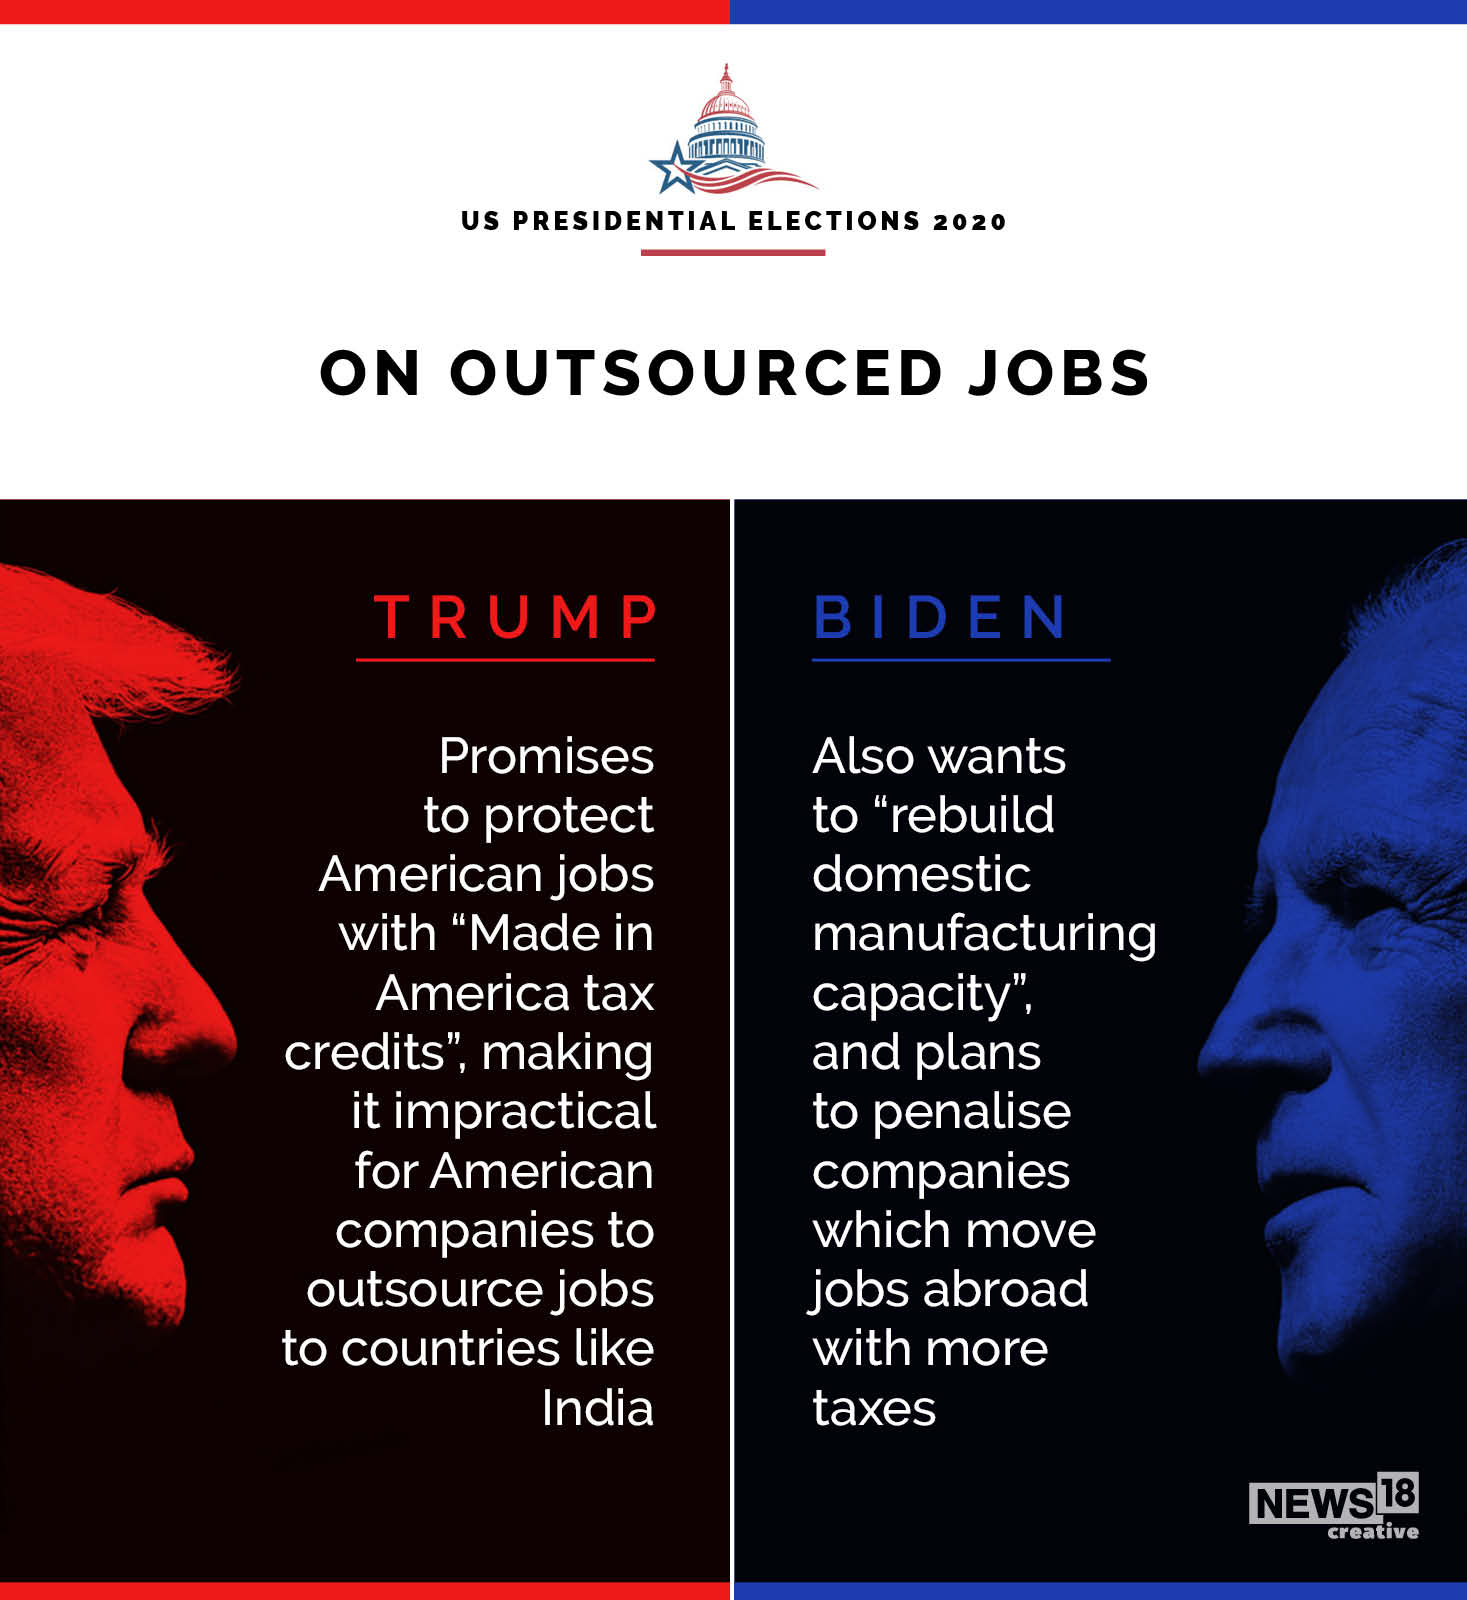 Donald Trump or Joe Biden: Who is better for India?